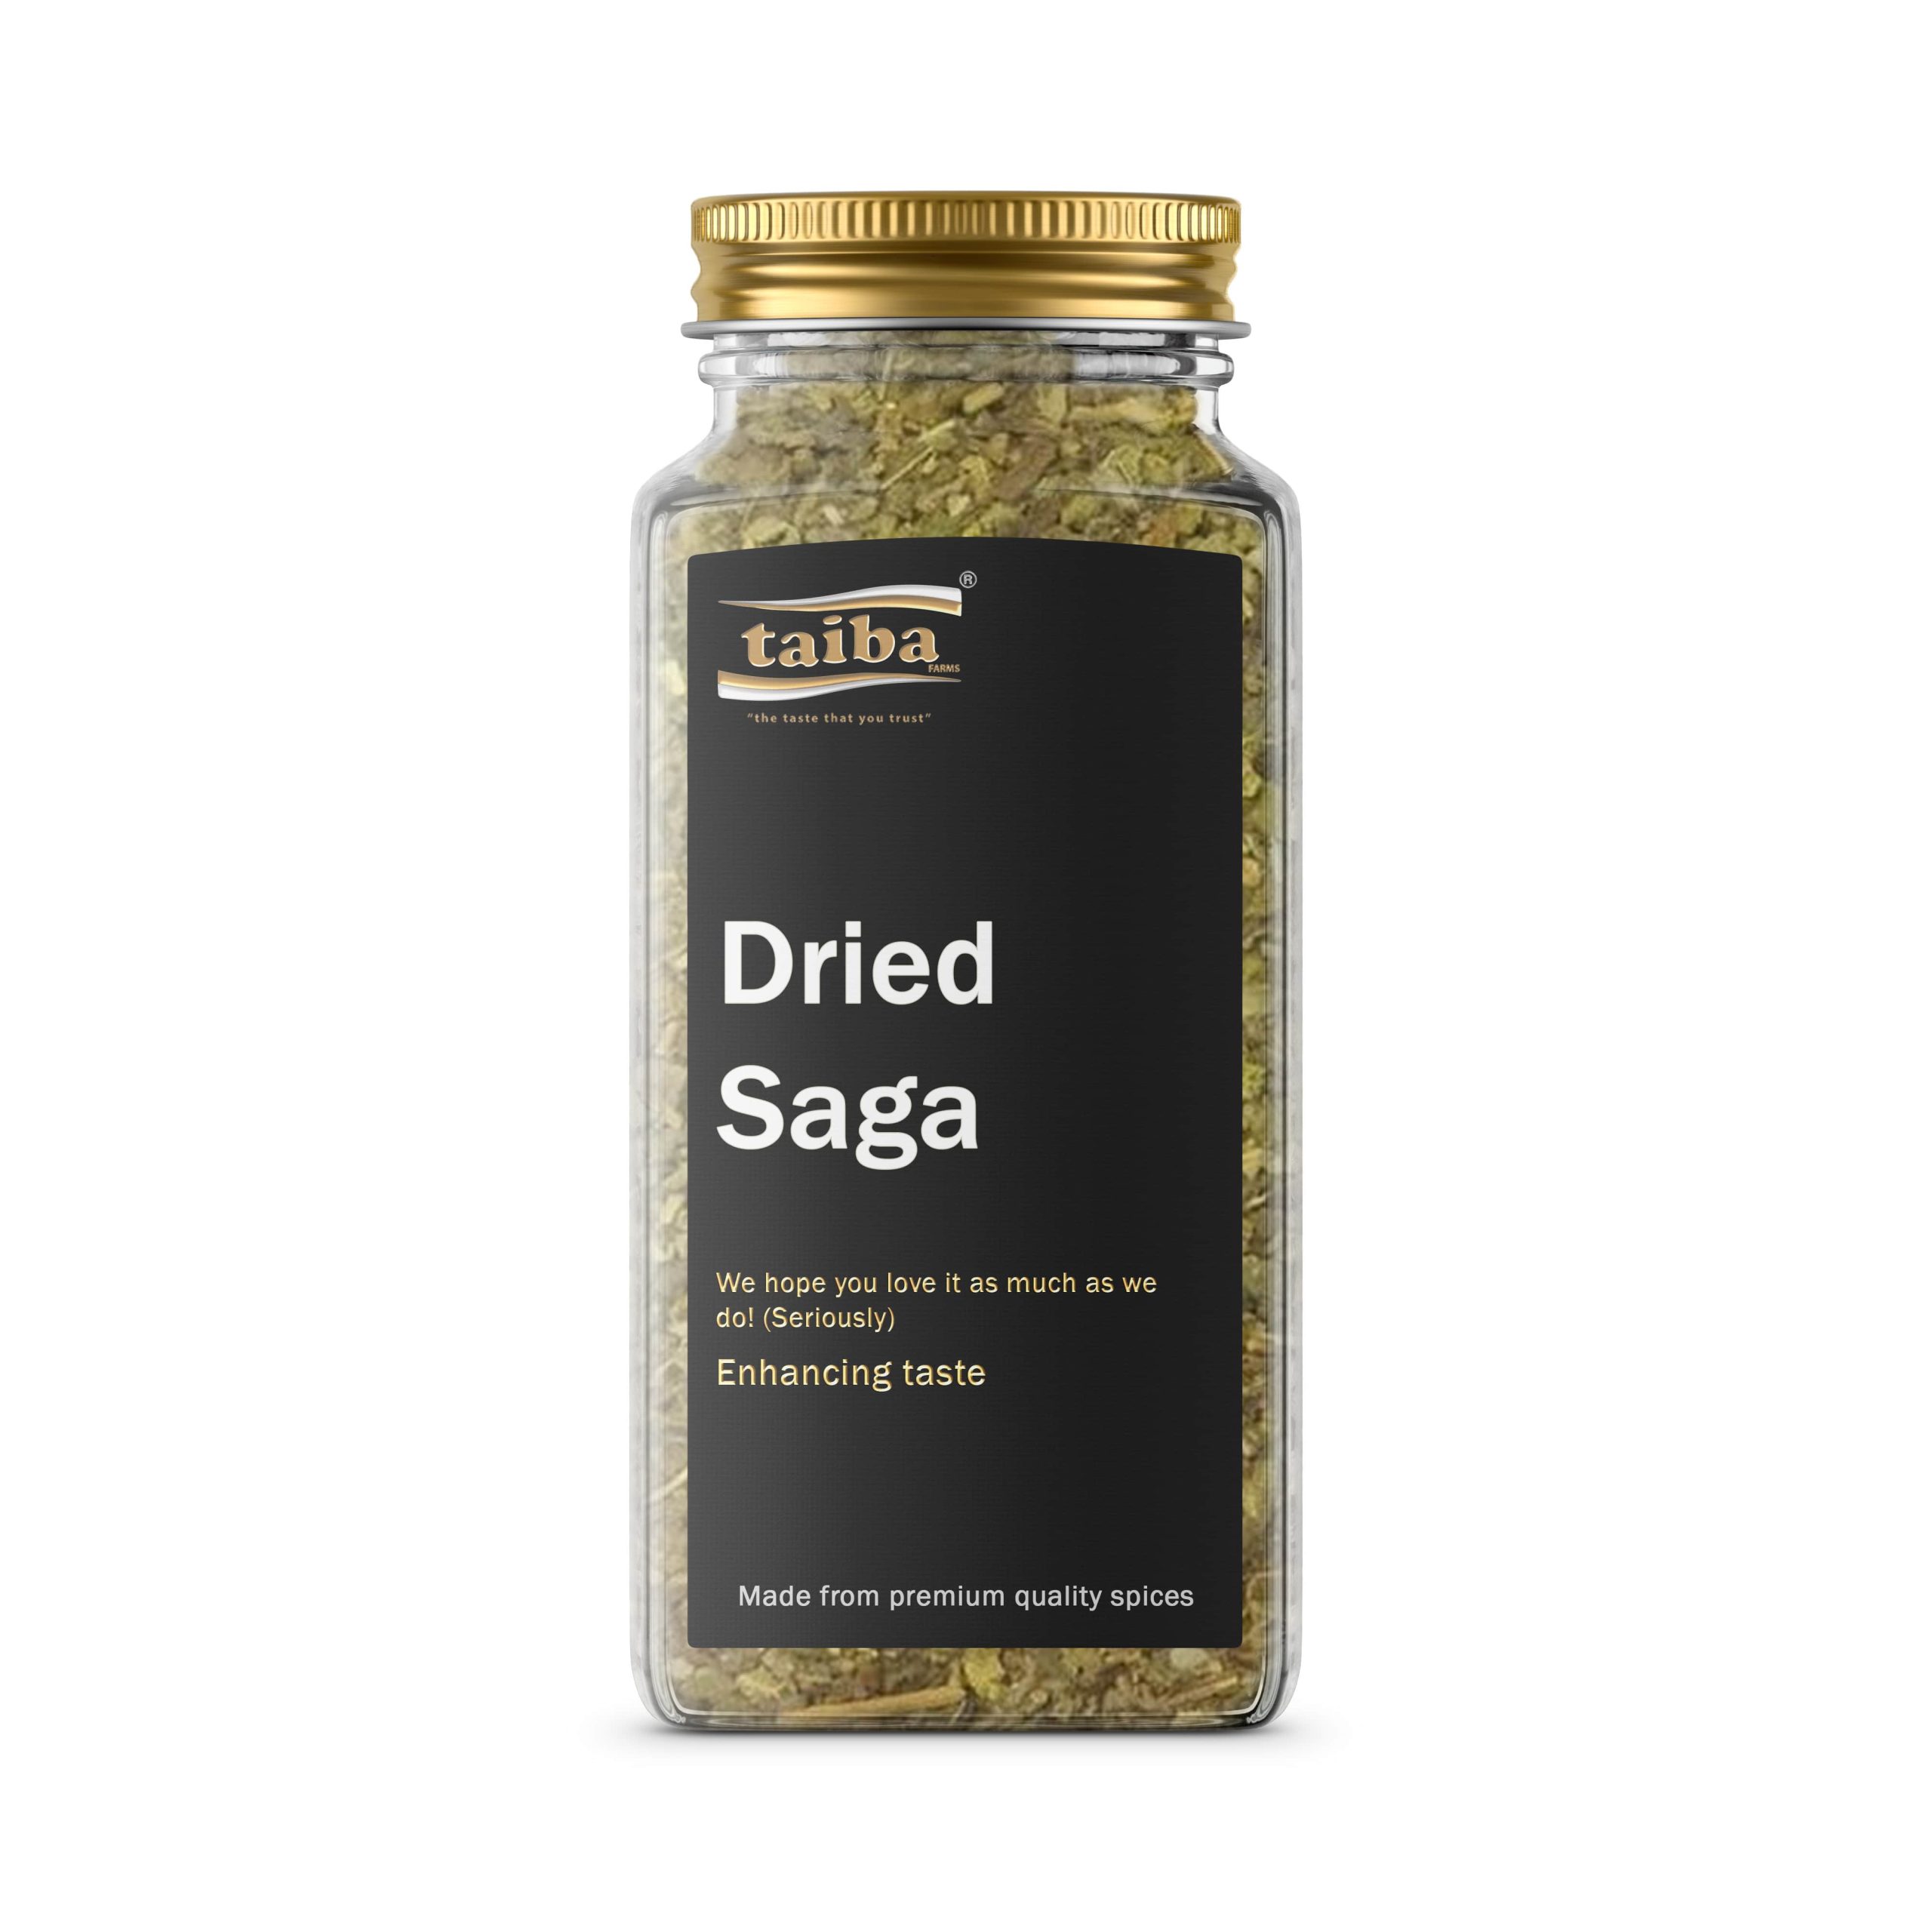 Saga-online-grocery-hearps-and-spices-online-home-delivery-in-UAE-Dubai-Abu-Dhabi-and-Sharjah-online-spices-suppliers-in-dubai-uae-abu-dhabi